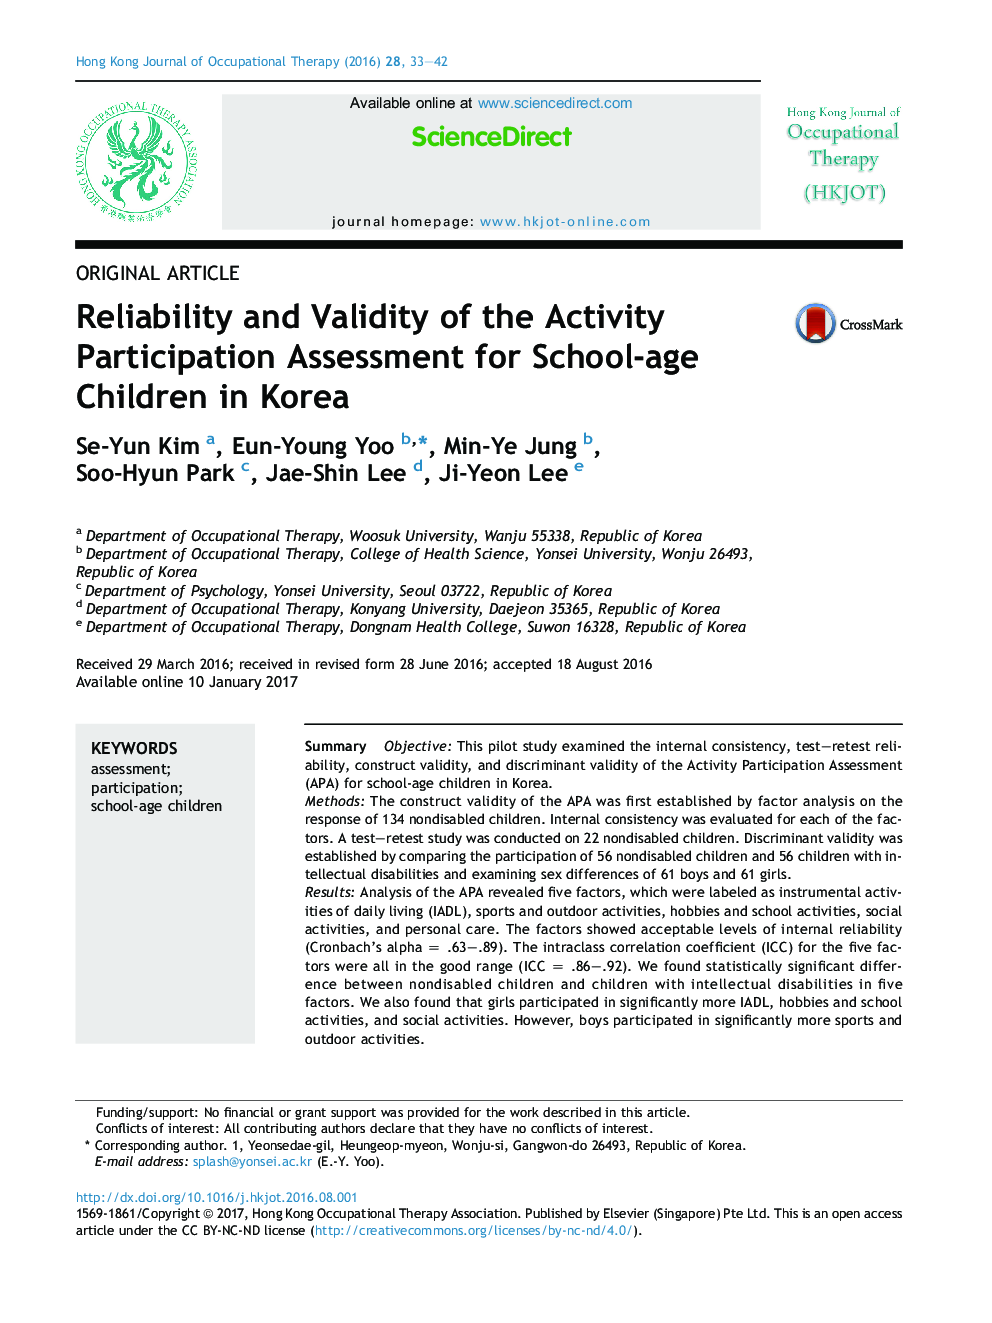 Reliability and Validity of the Activity Participation Assessment for School-age Children in Korea